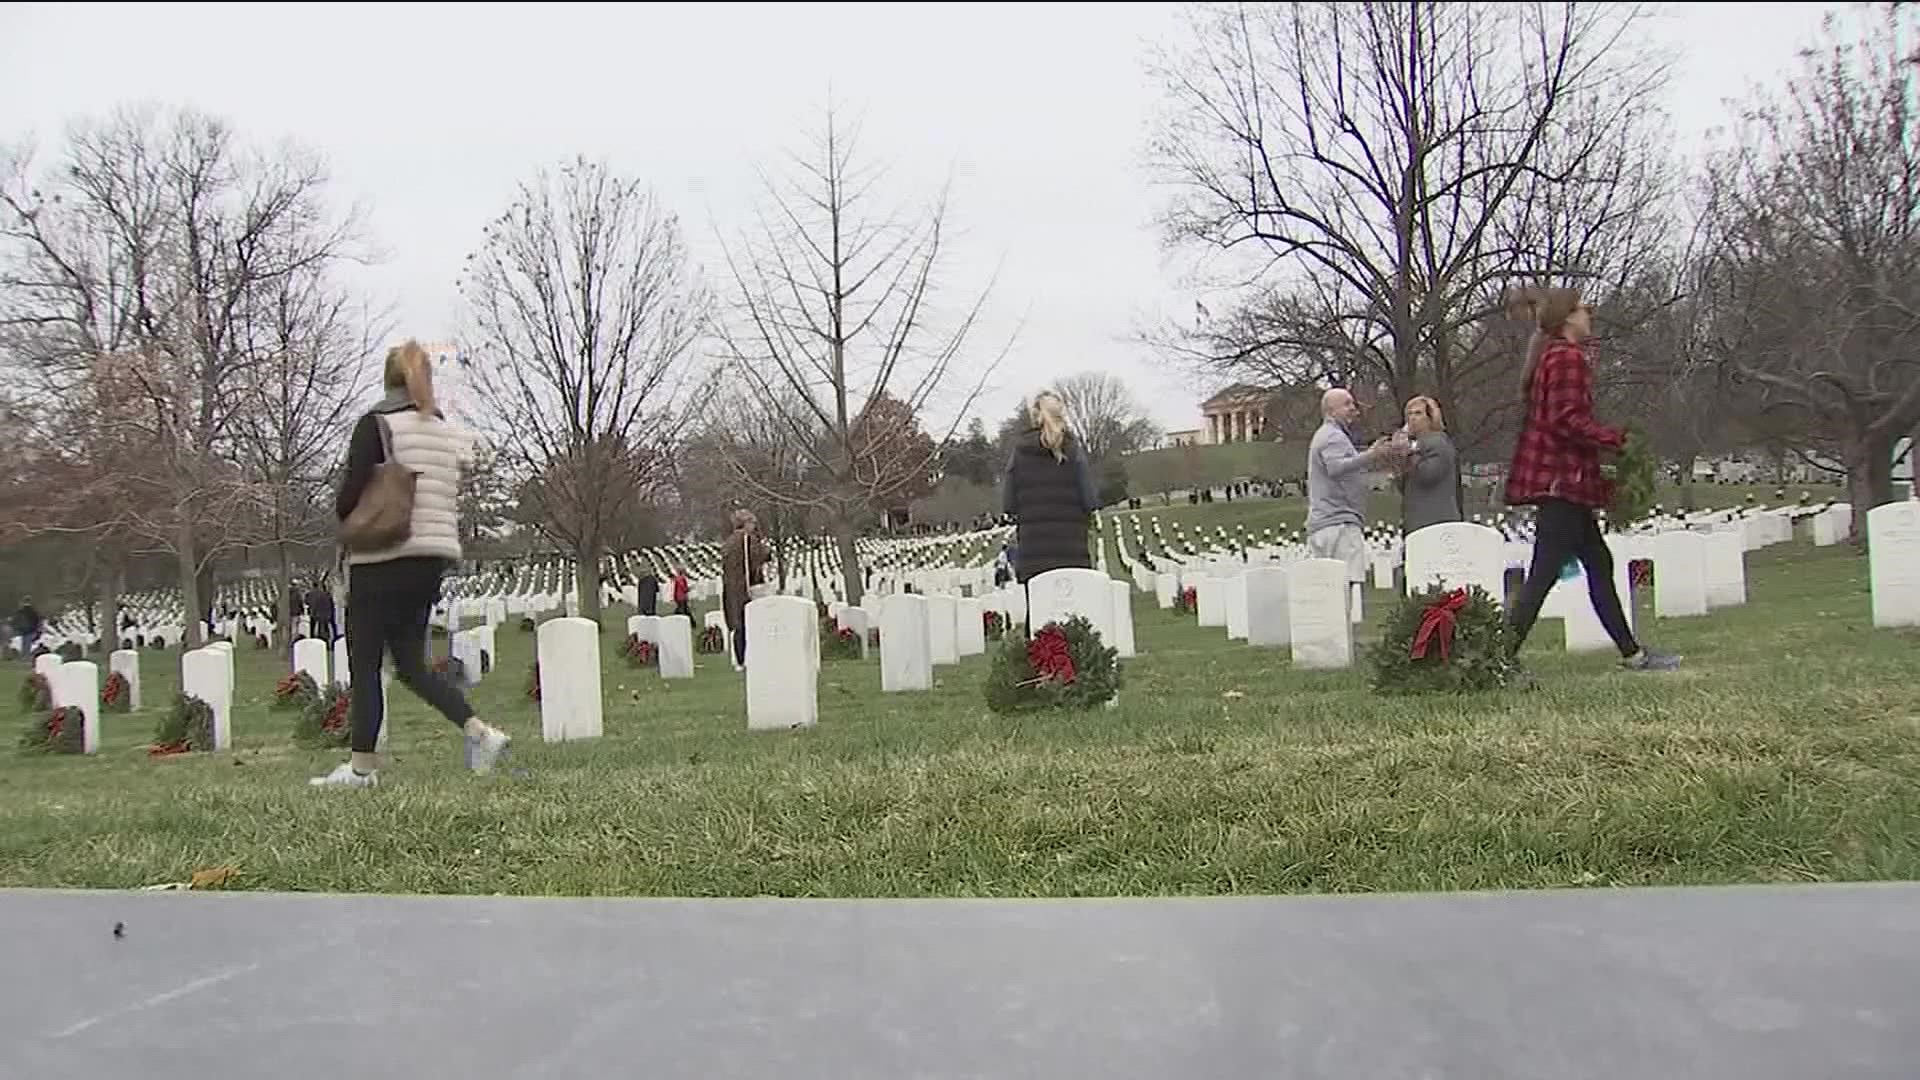 Wreaths Across America is a nonprofit organization that asks people to donate $15 per wreath to be laid on the graves of veterans.